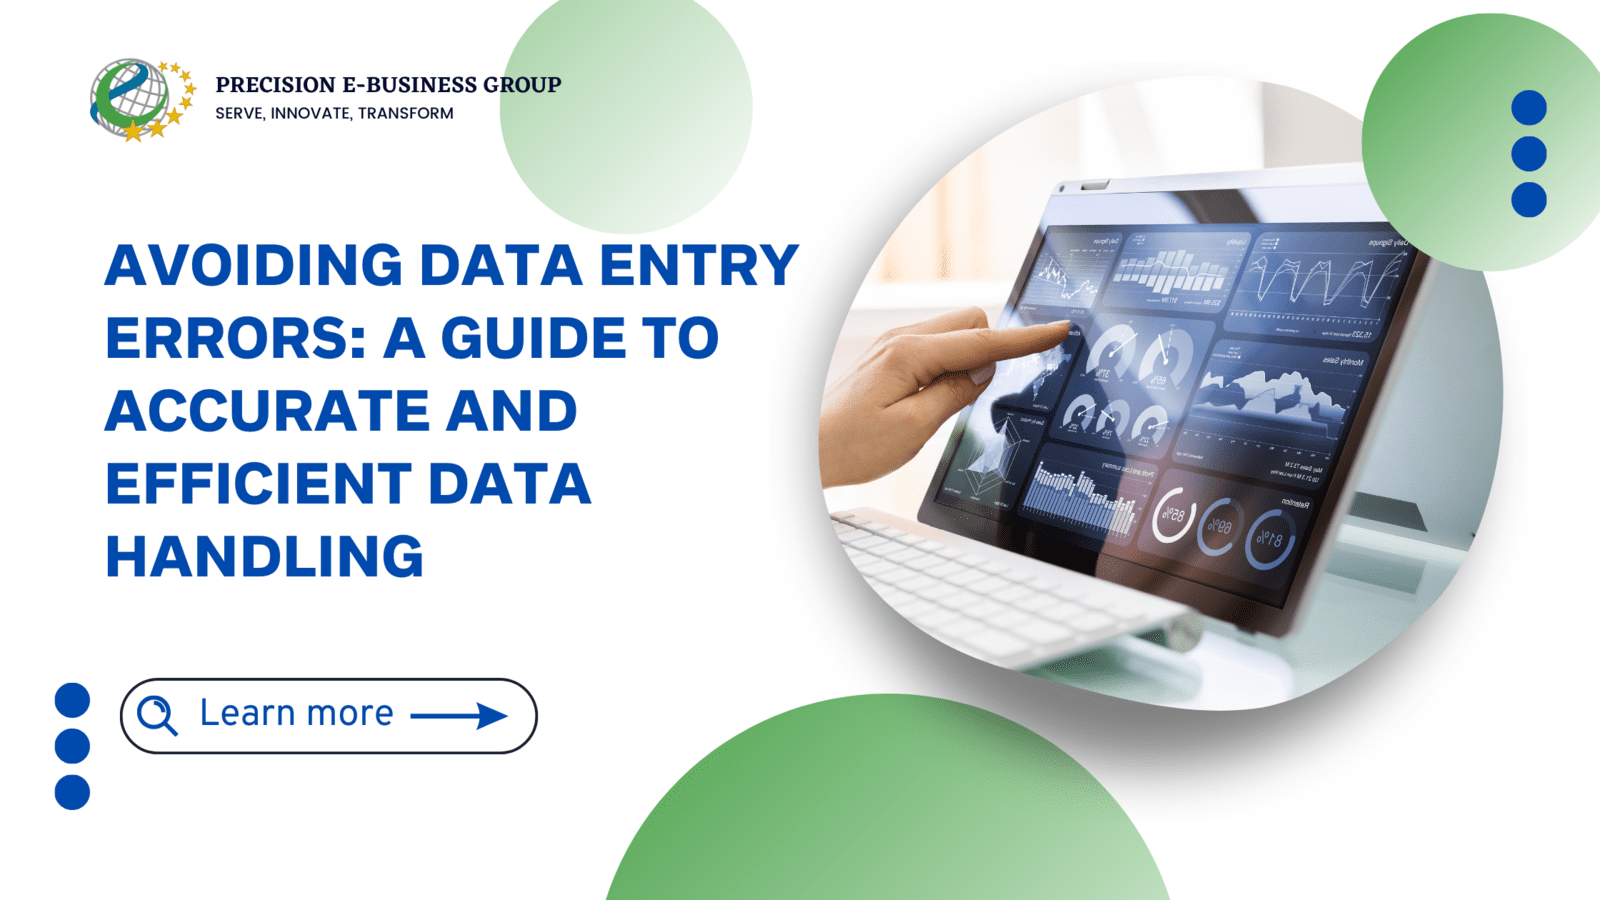 Avoiding Data Entry Errors: A Guide to Accurate and Efficient Data Handling